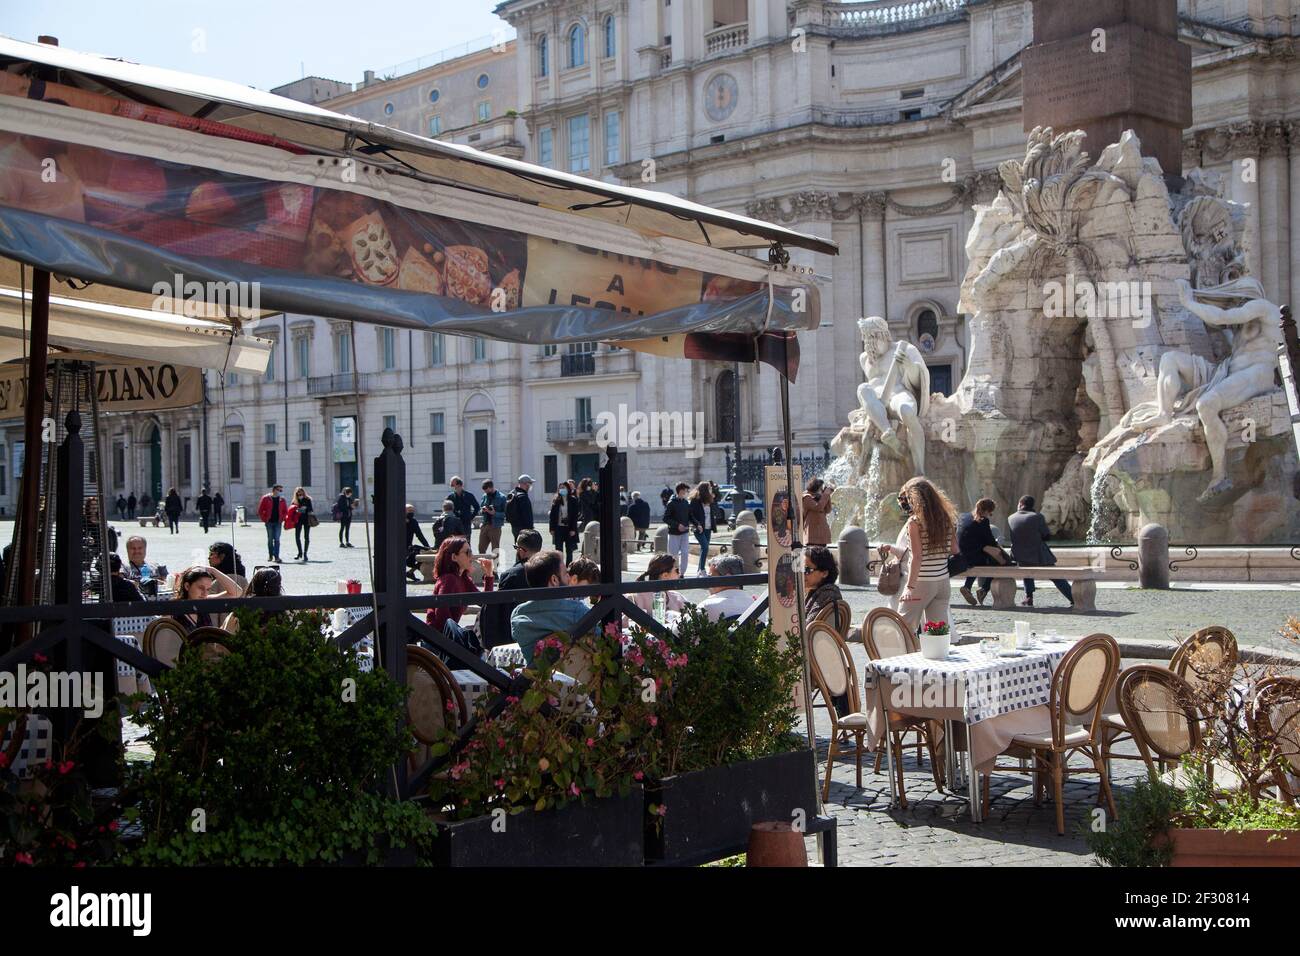 Rome, ITALY- 13 March 2021: People enjoy a sunny day by the Spanish Steps on Piazza di Spagna in downtown Rome before the government tightens restrictions across most of the country from March 15, facing a 'new wave' of Covid-19 Stock Photo